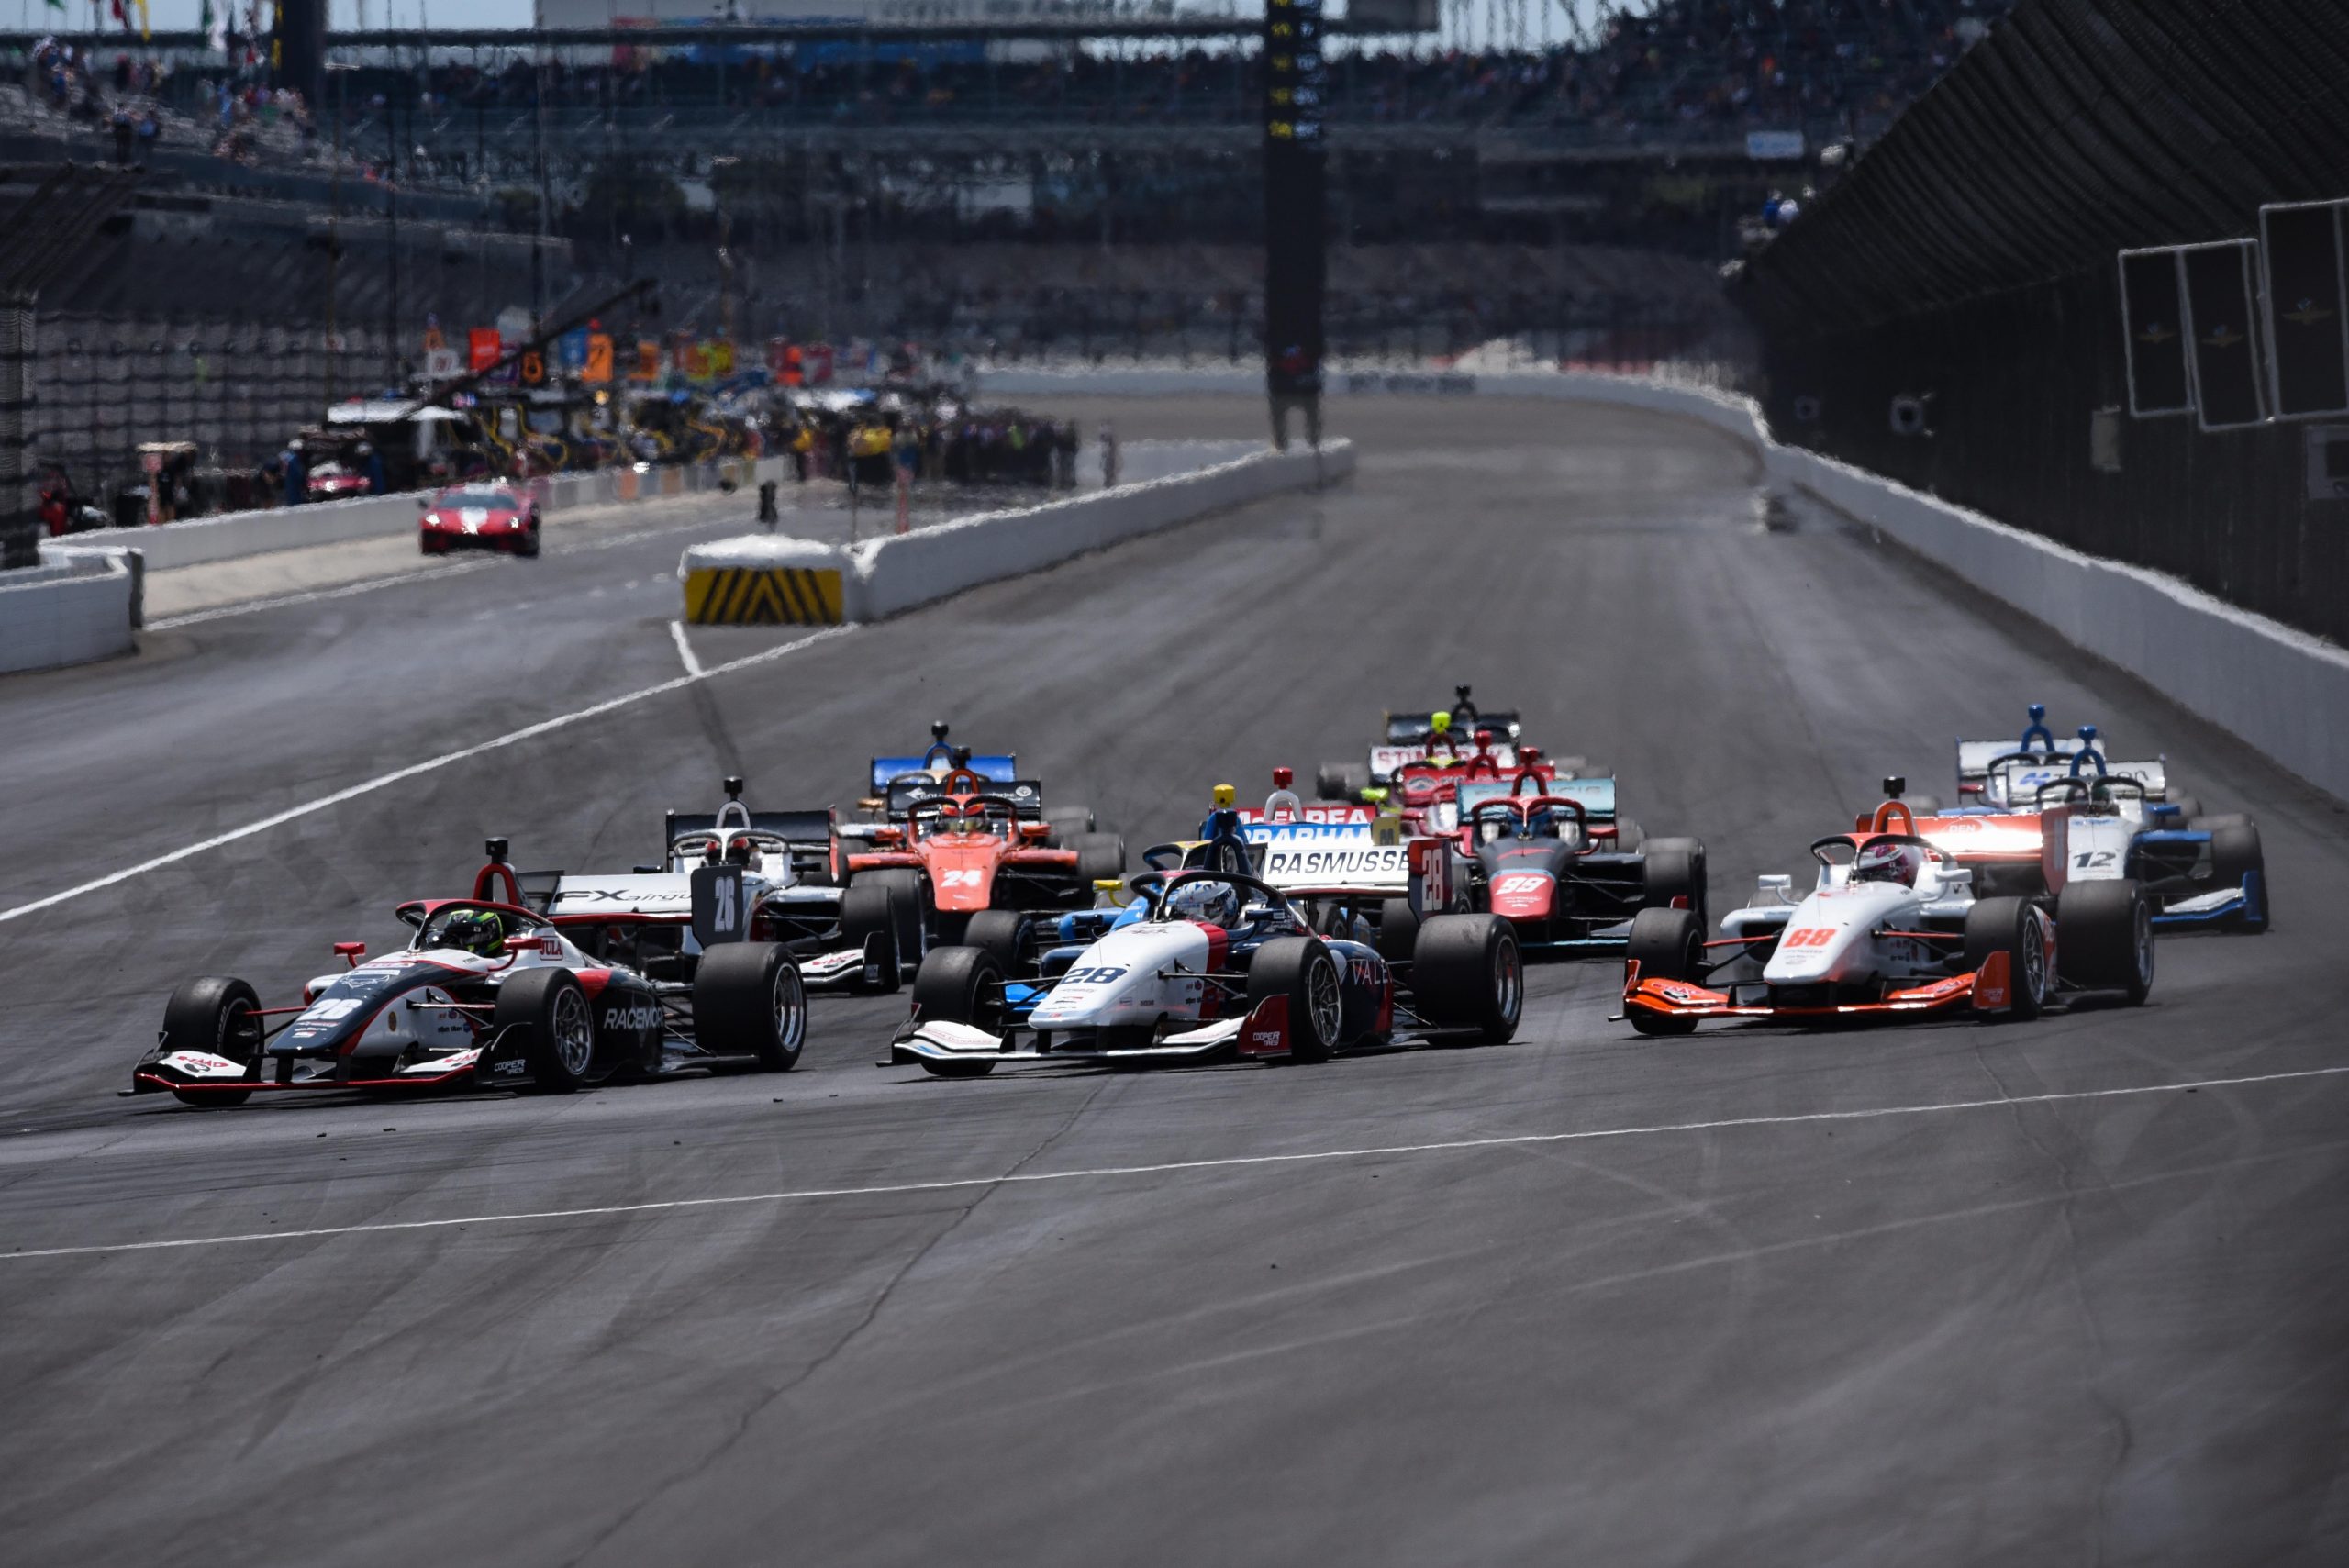 Lap 1 of the 2022 Indy Lights Grand Prix of Indianapolis at the Indianapolis Motor Speedway